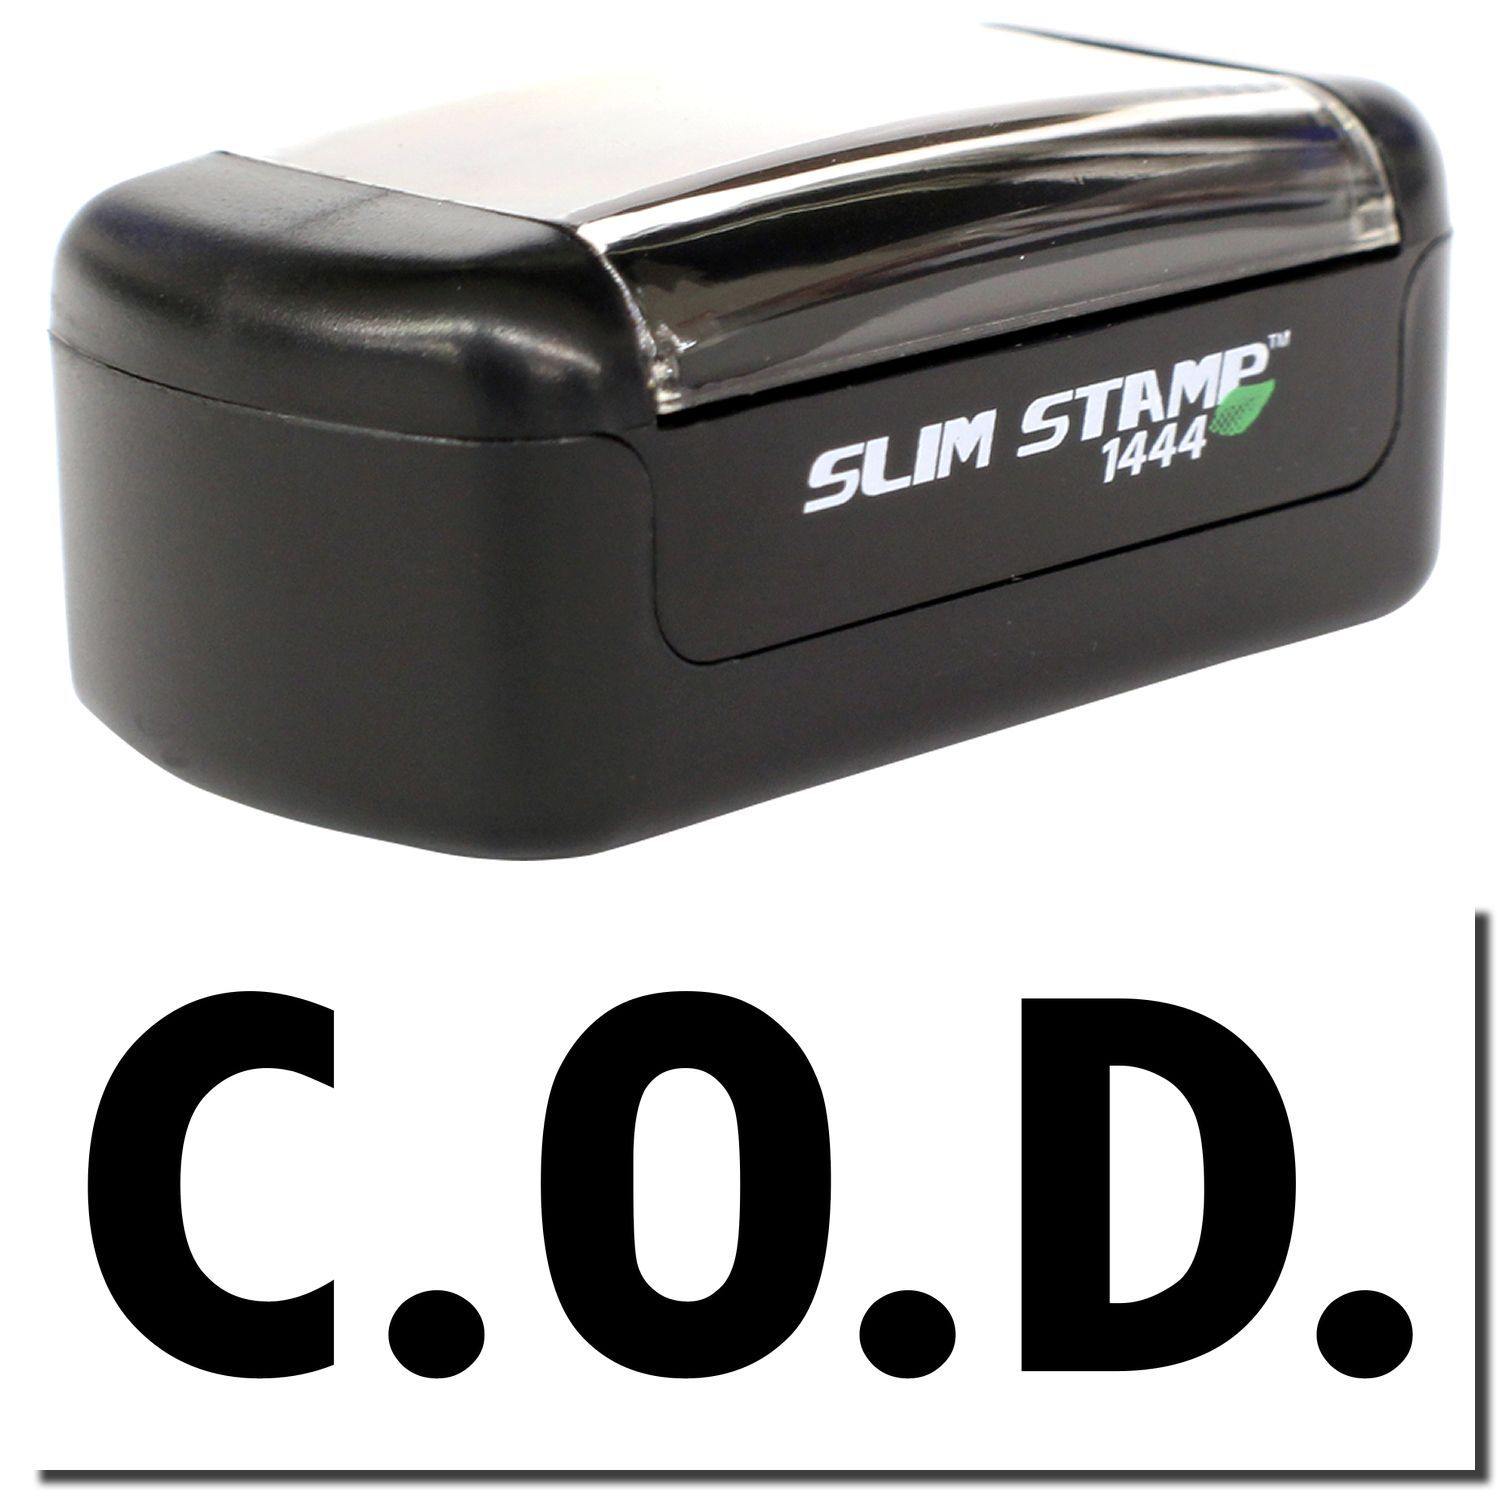 A stock office pre-inked stamp with a stamped image showing how the text "C.O.D." is displayed after stamping.